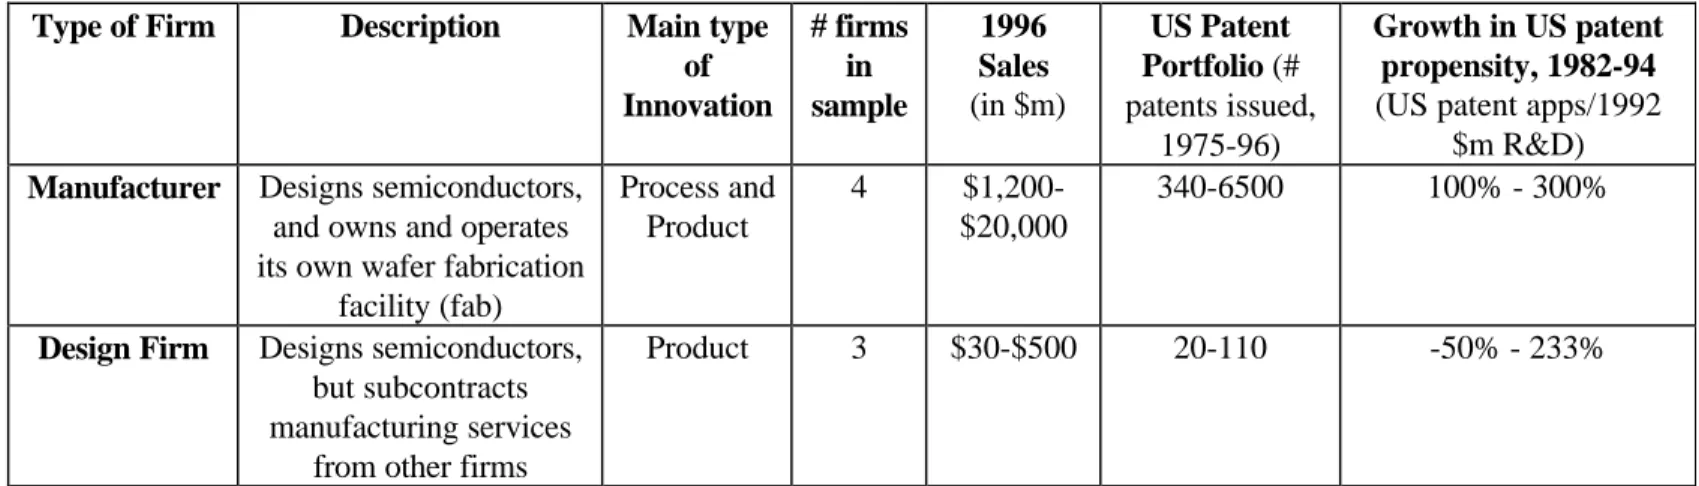 Table A.2: Description of Firms in Interview Sample Type of Firm Description Main type